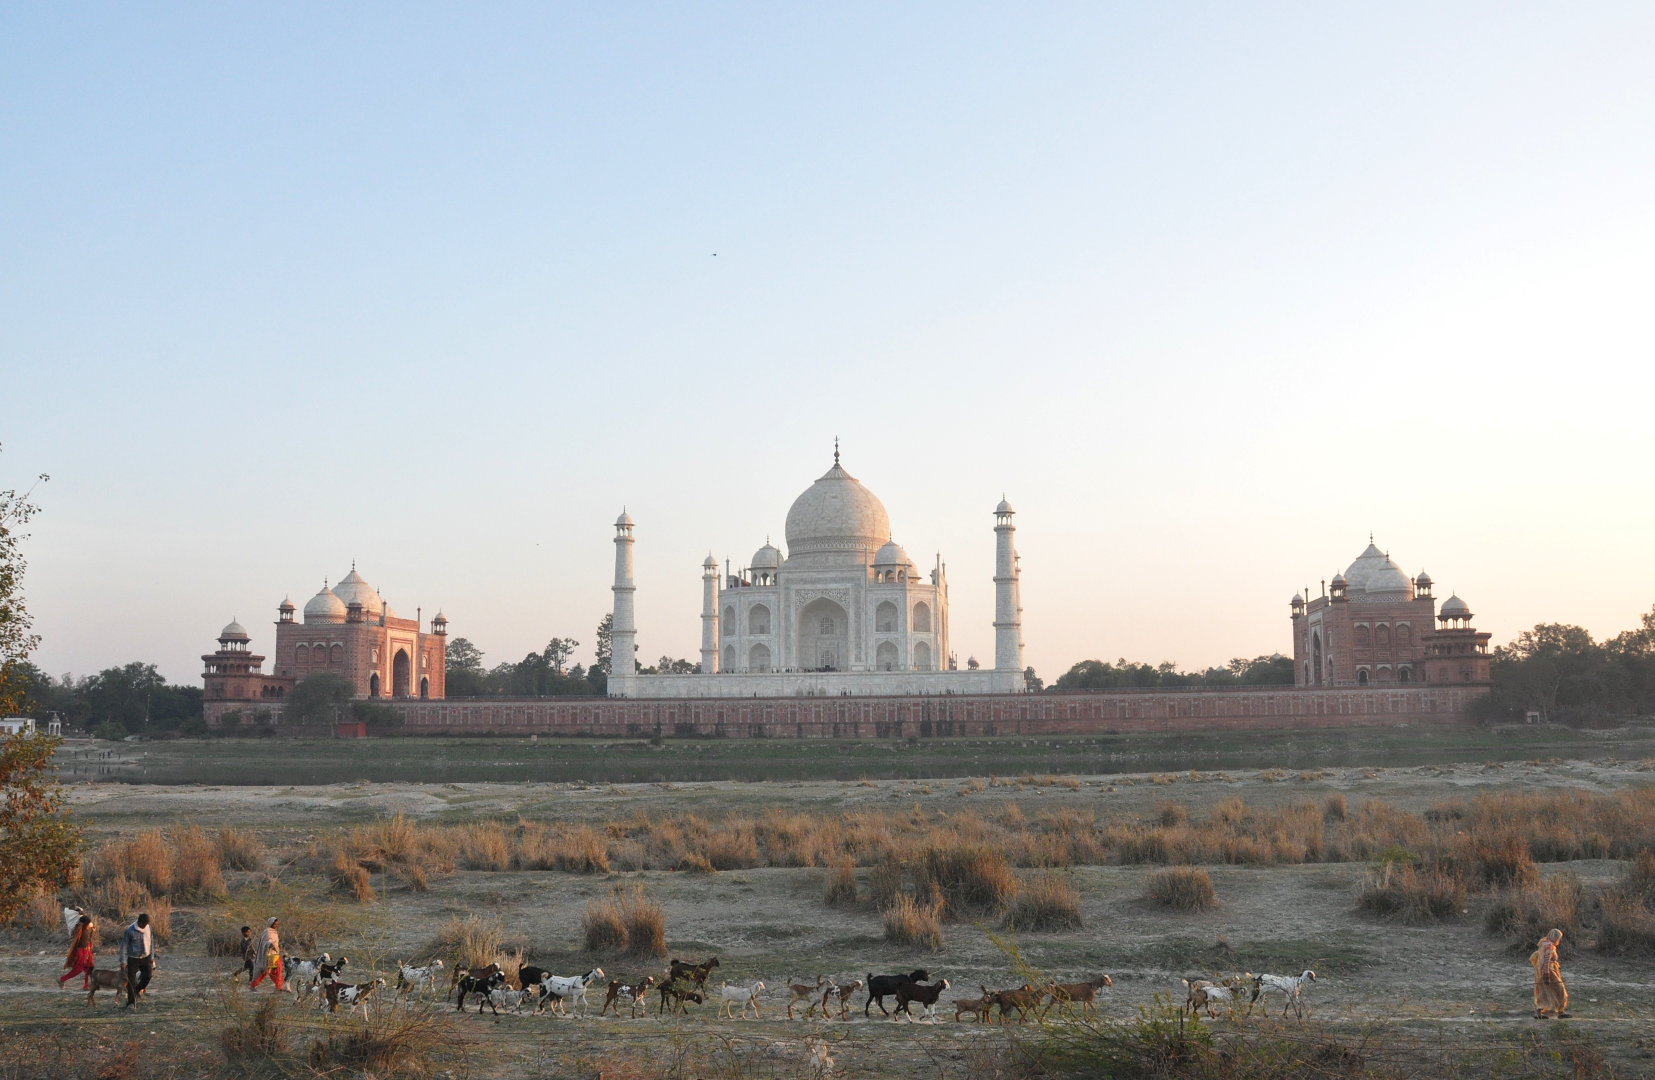 Vision of Taj Mahal with a grazing horse in foreground.